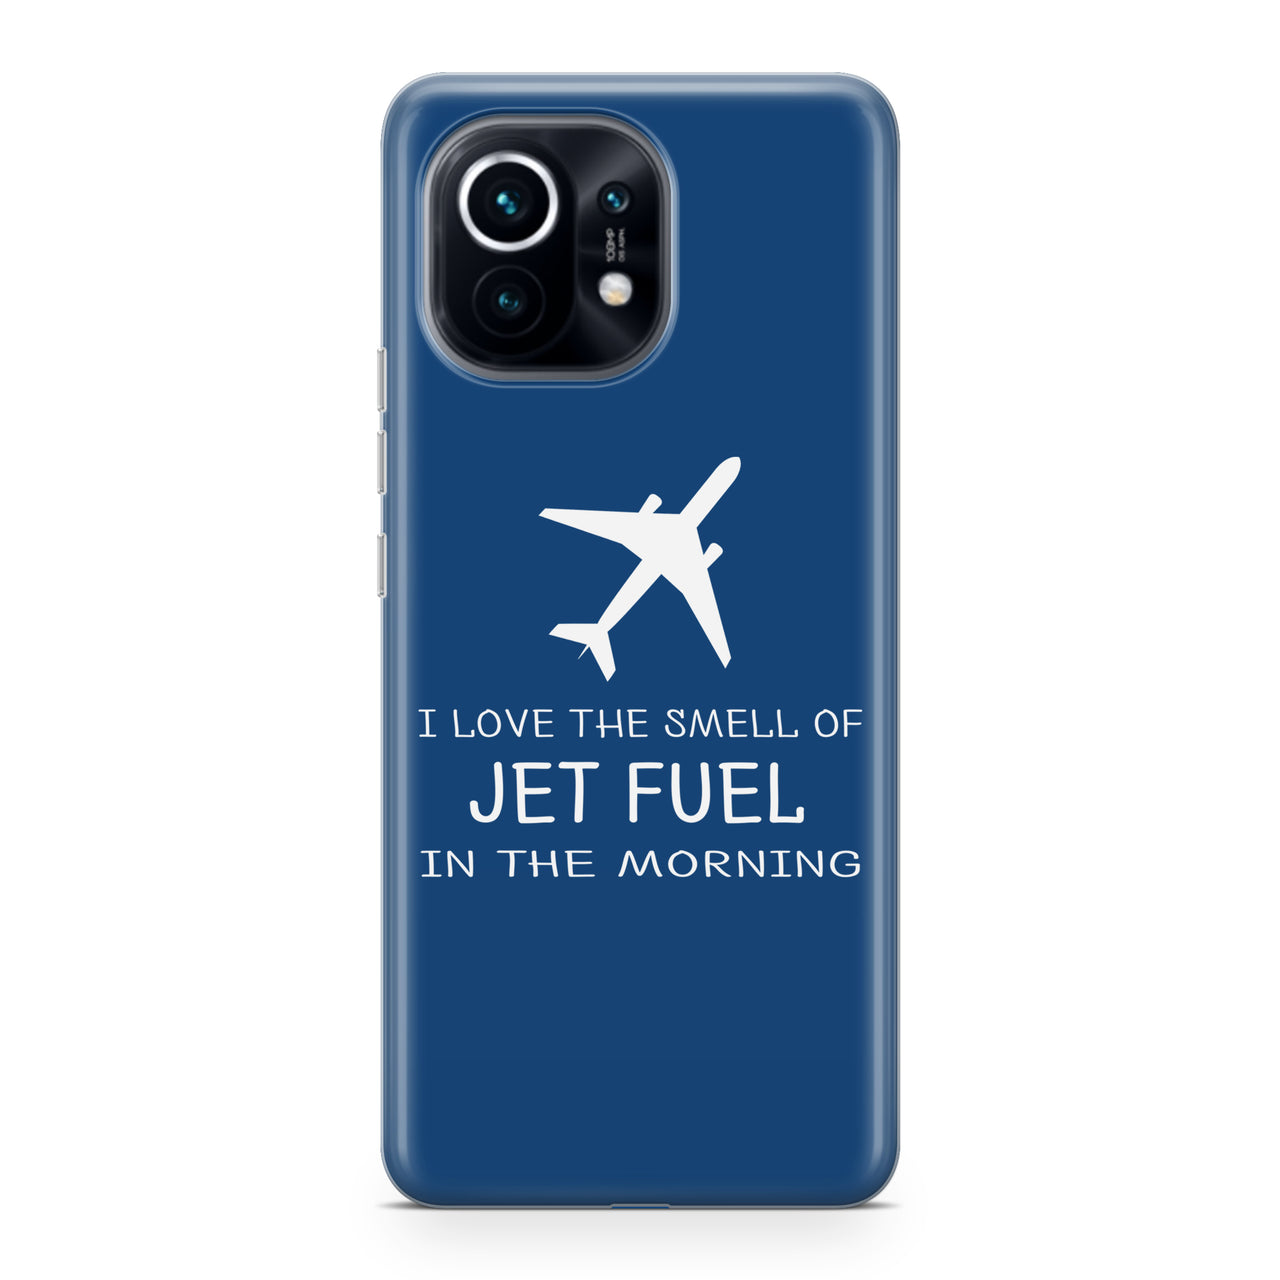 I Love The Smell Of Jet Fuel In The Morning Designed Xiaomi Cases